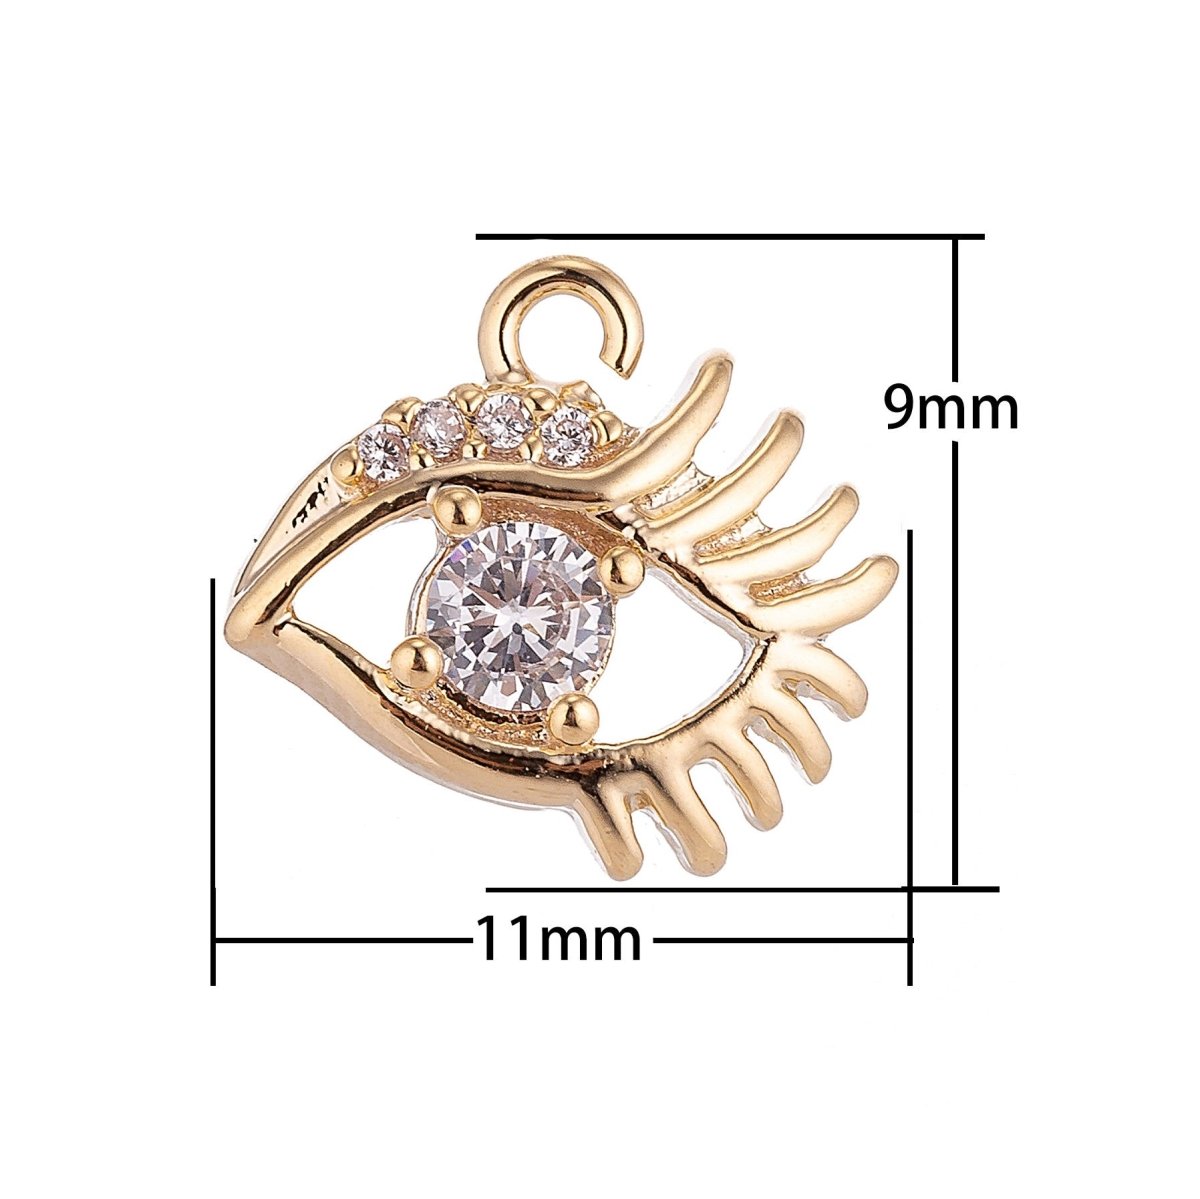 18K Gold Filled Delicate Cute One Eye with Eyelashes Cubic Zirconia Bracelet Necklace Pendant Earring Charm Gift for Woman Jewelry Making C-099 - DLUXCA